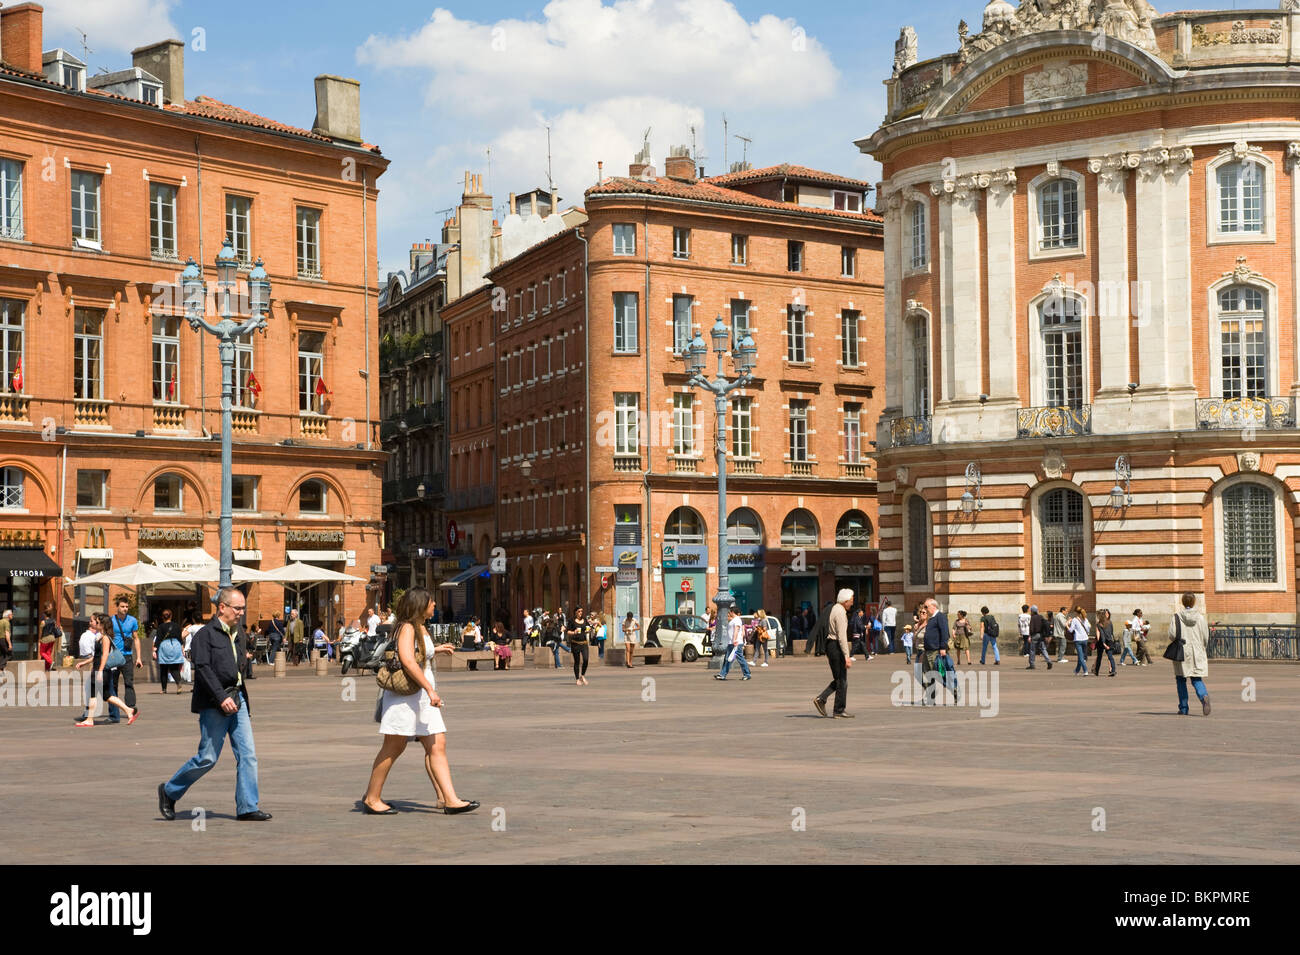 The Beautiful Architecture in Place du Capitole [Capital Square] with Shops and Office Buildings Toulouse Haute-Garonne France Stock Photo